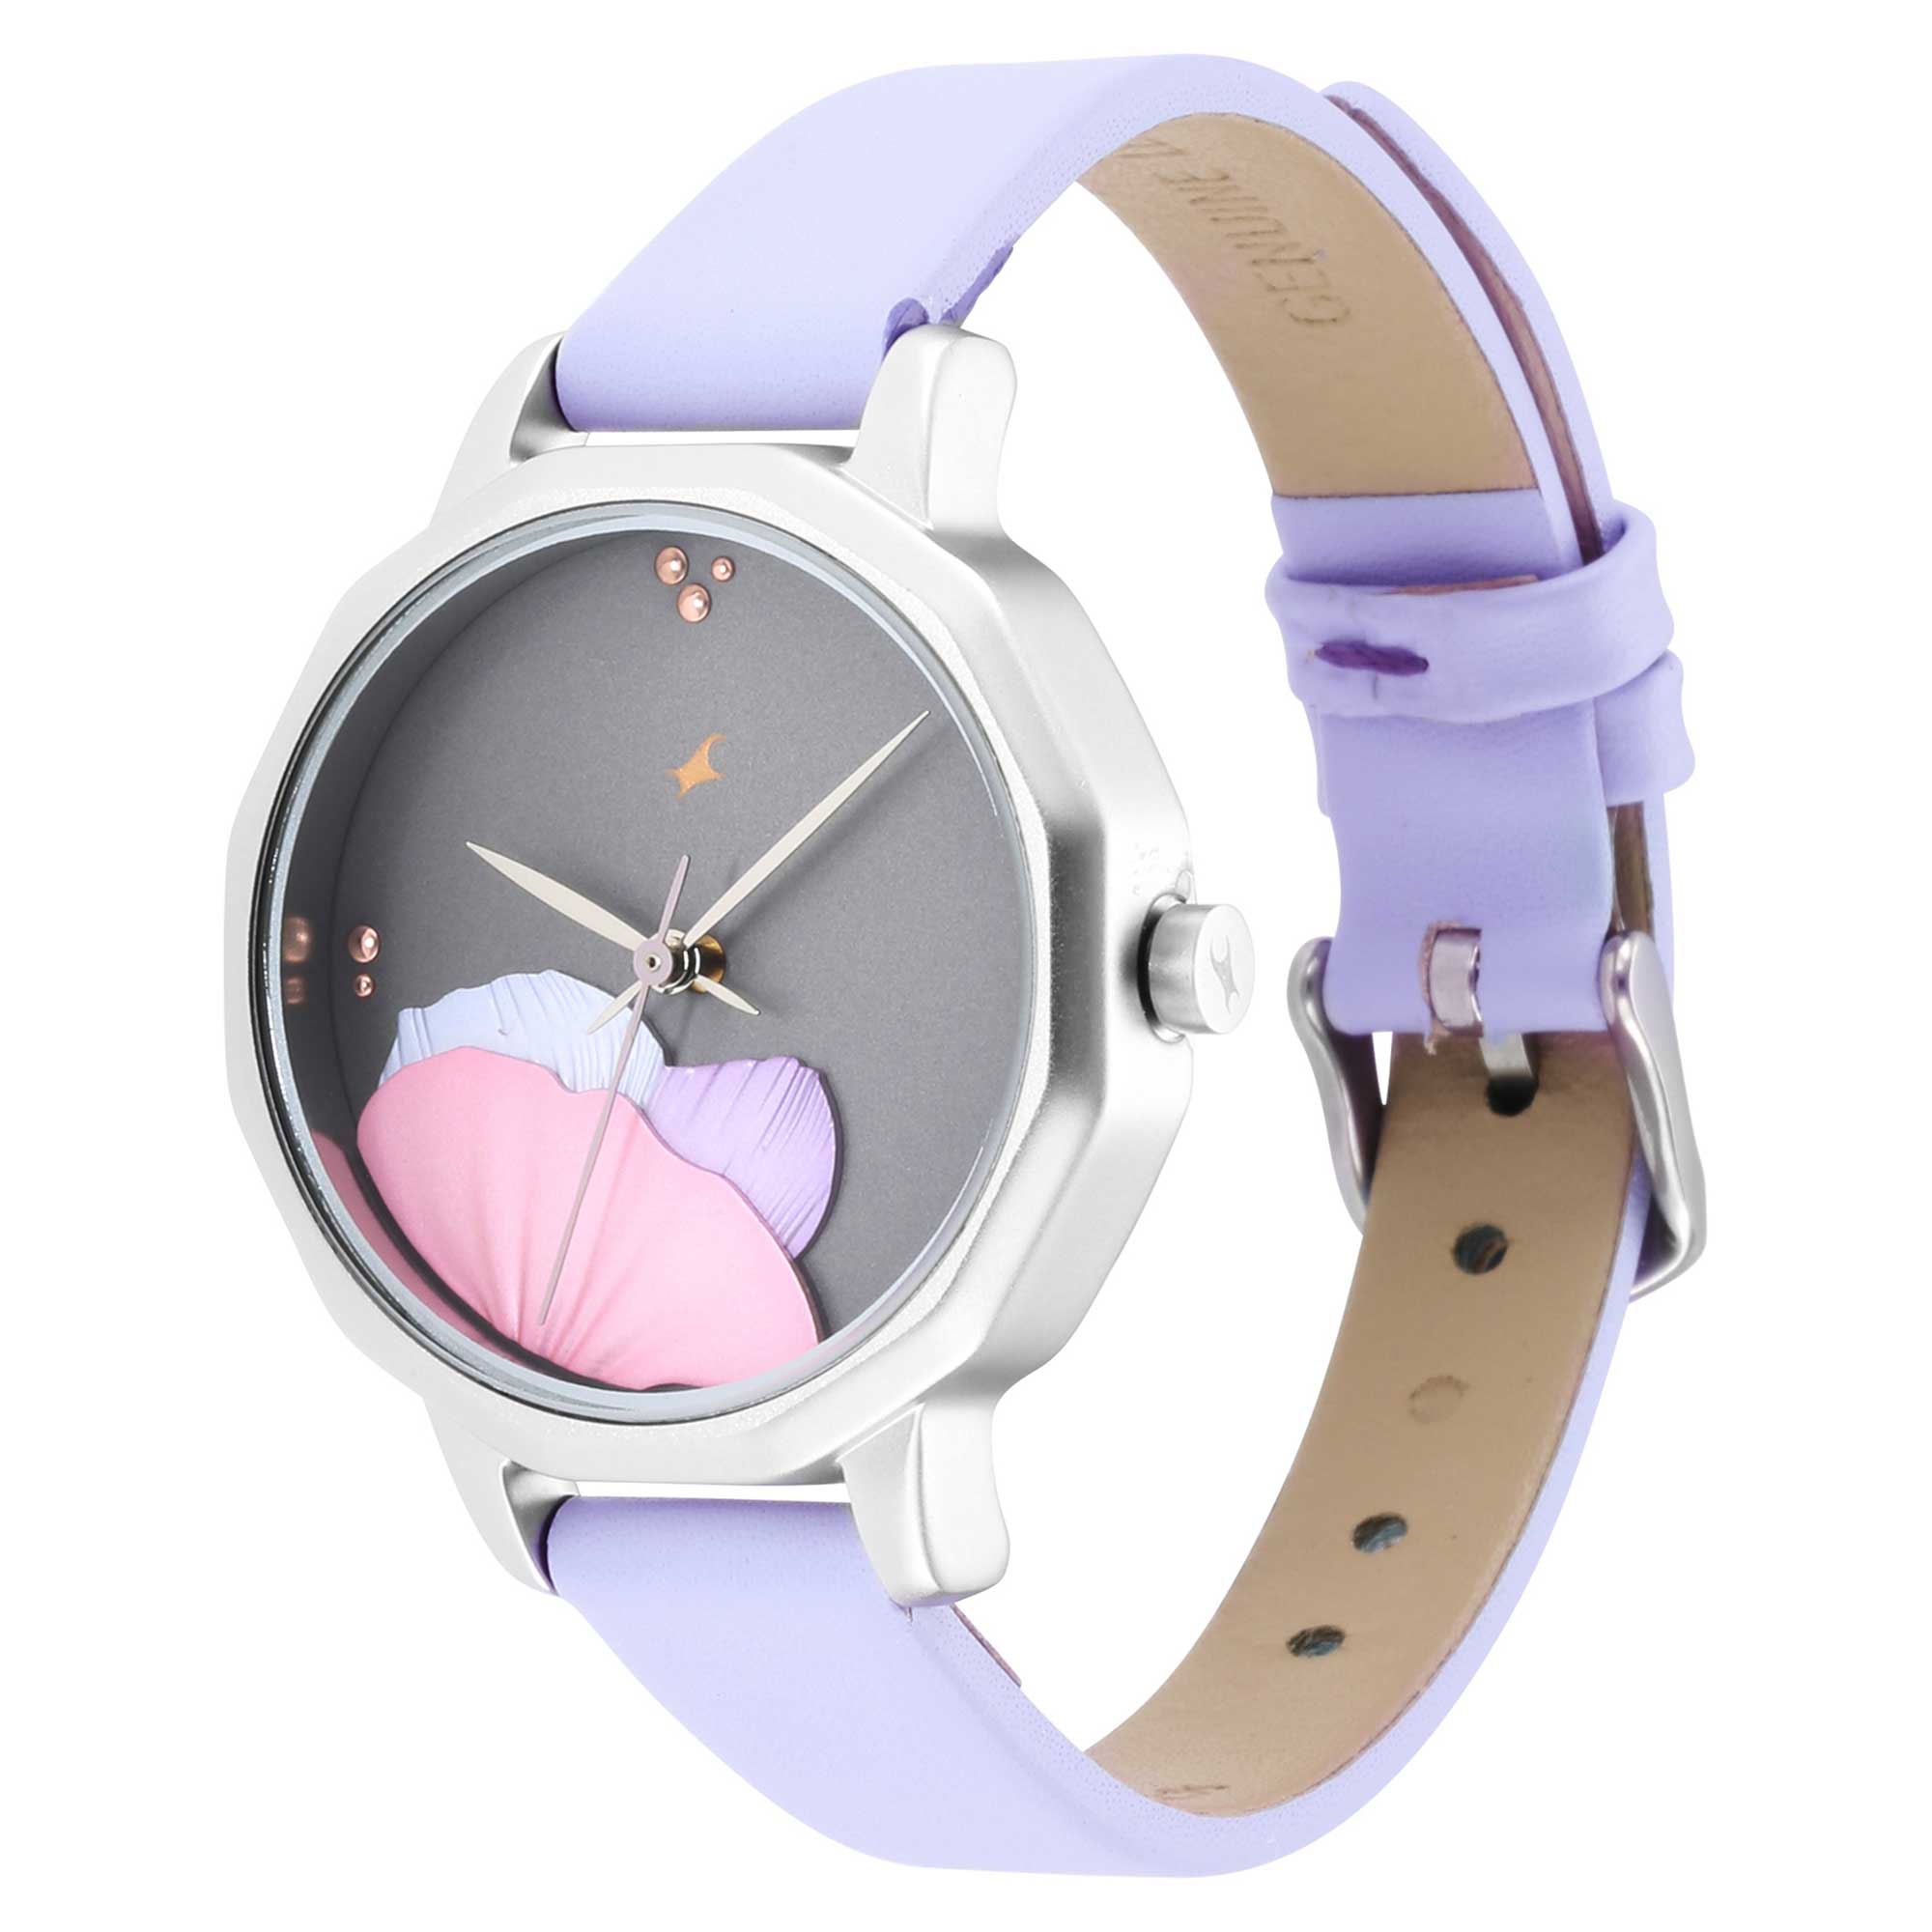 Fastrack Uptown Retreat Quartz Analog Grey Dial Leather Strap Watch for Girls